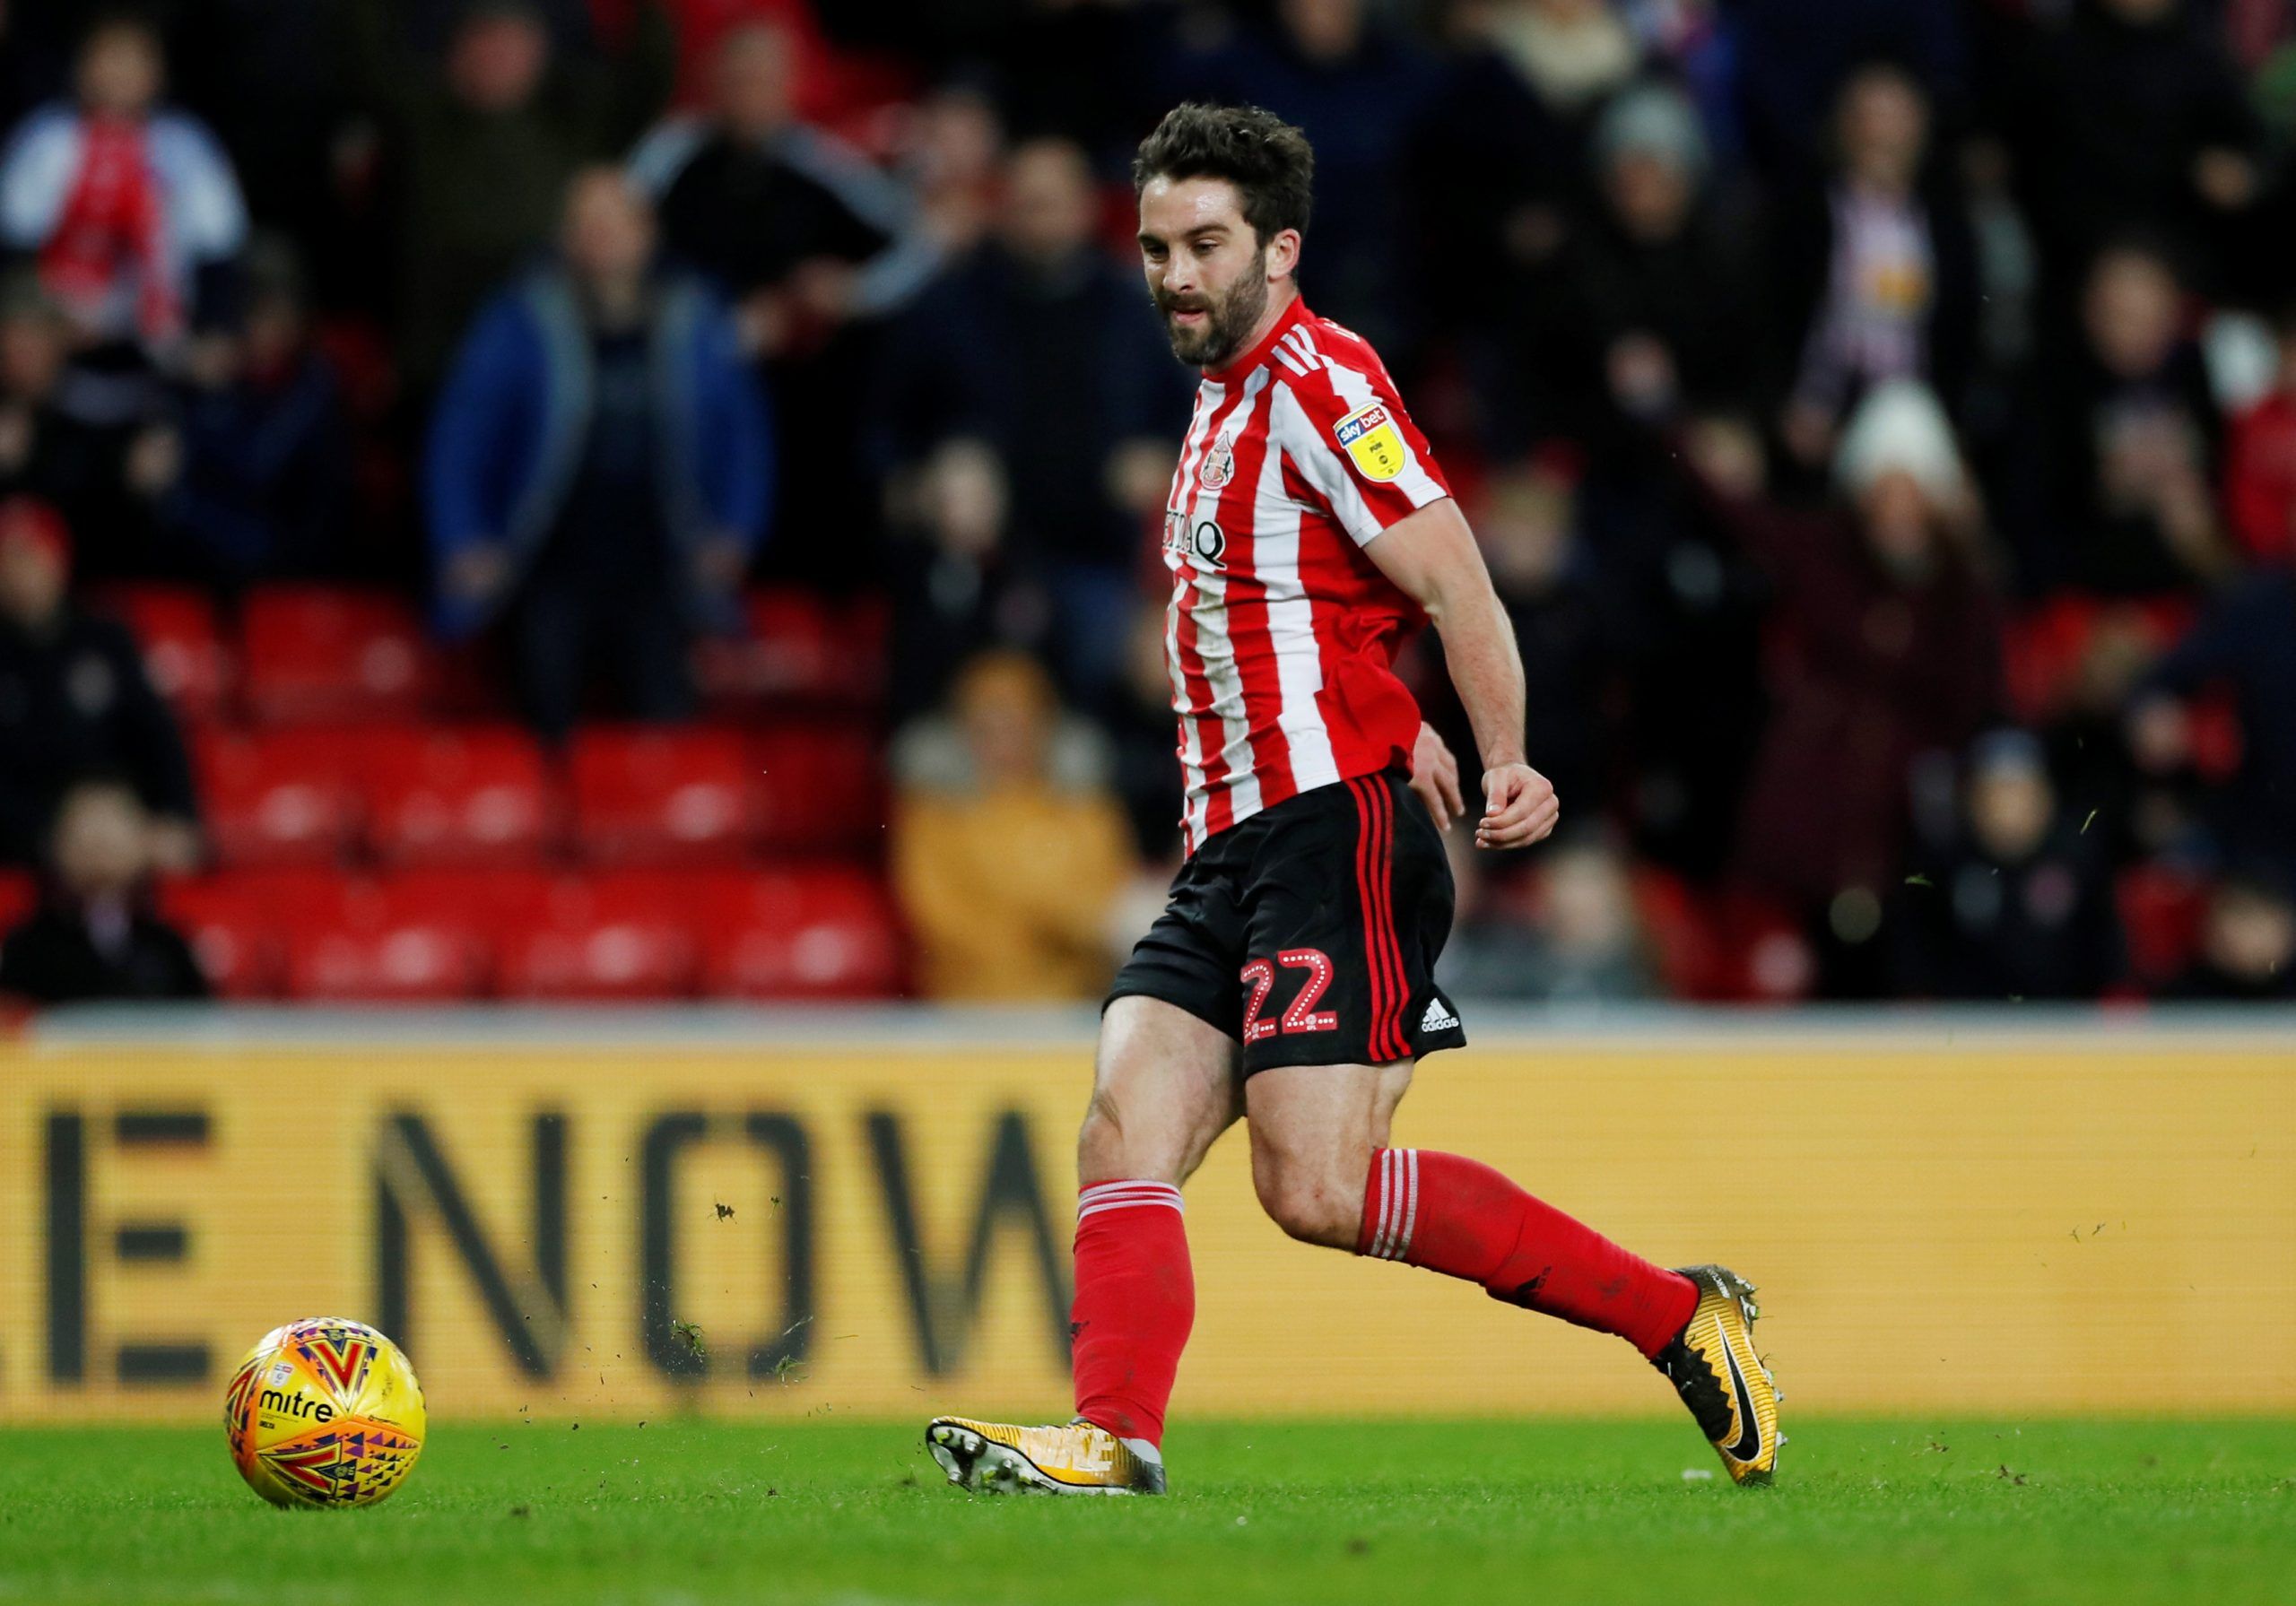 Soccer Football - League One - Sunderland v Blackpool - Stadium of Light, Sunderland, Britain - February 12, 2019   Sunderland's Will Grigg shoots at goal   Action Images/Lee Smith    EDITORIAL USE ONLY. No use with unauthorized audio, video, data, fixture lists, club/league logos or 